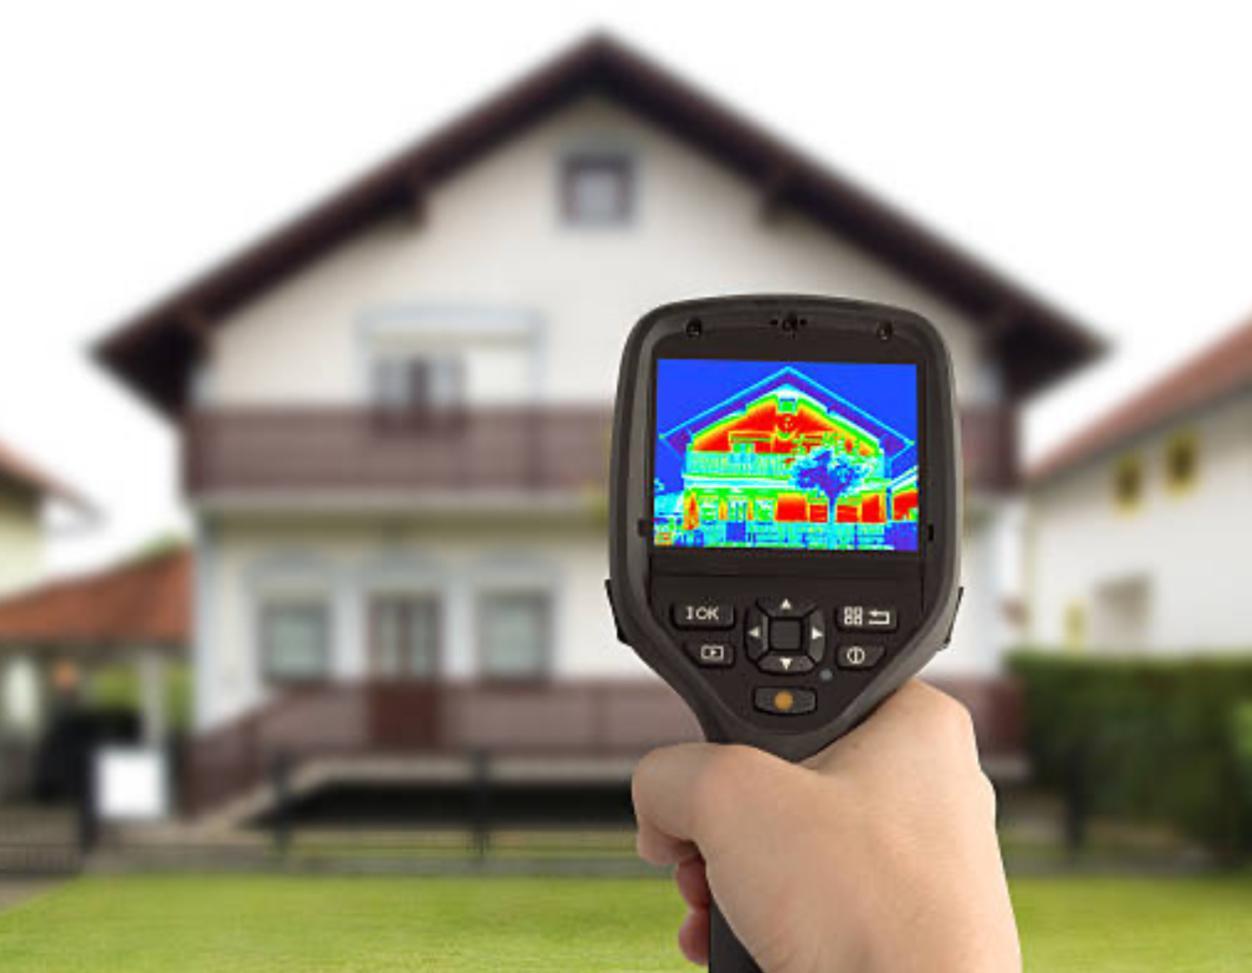 thermal camera being pointed at a house and showing areas of excessive temperature in the building